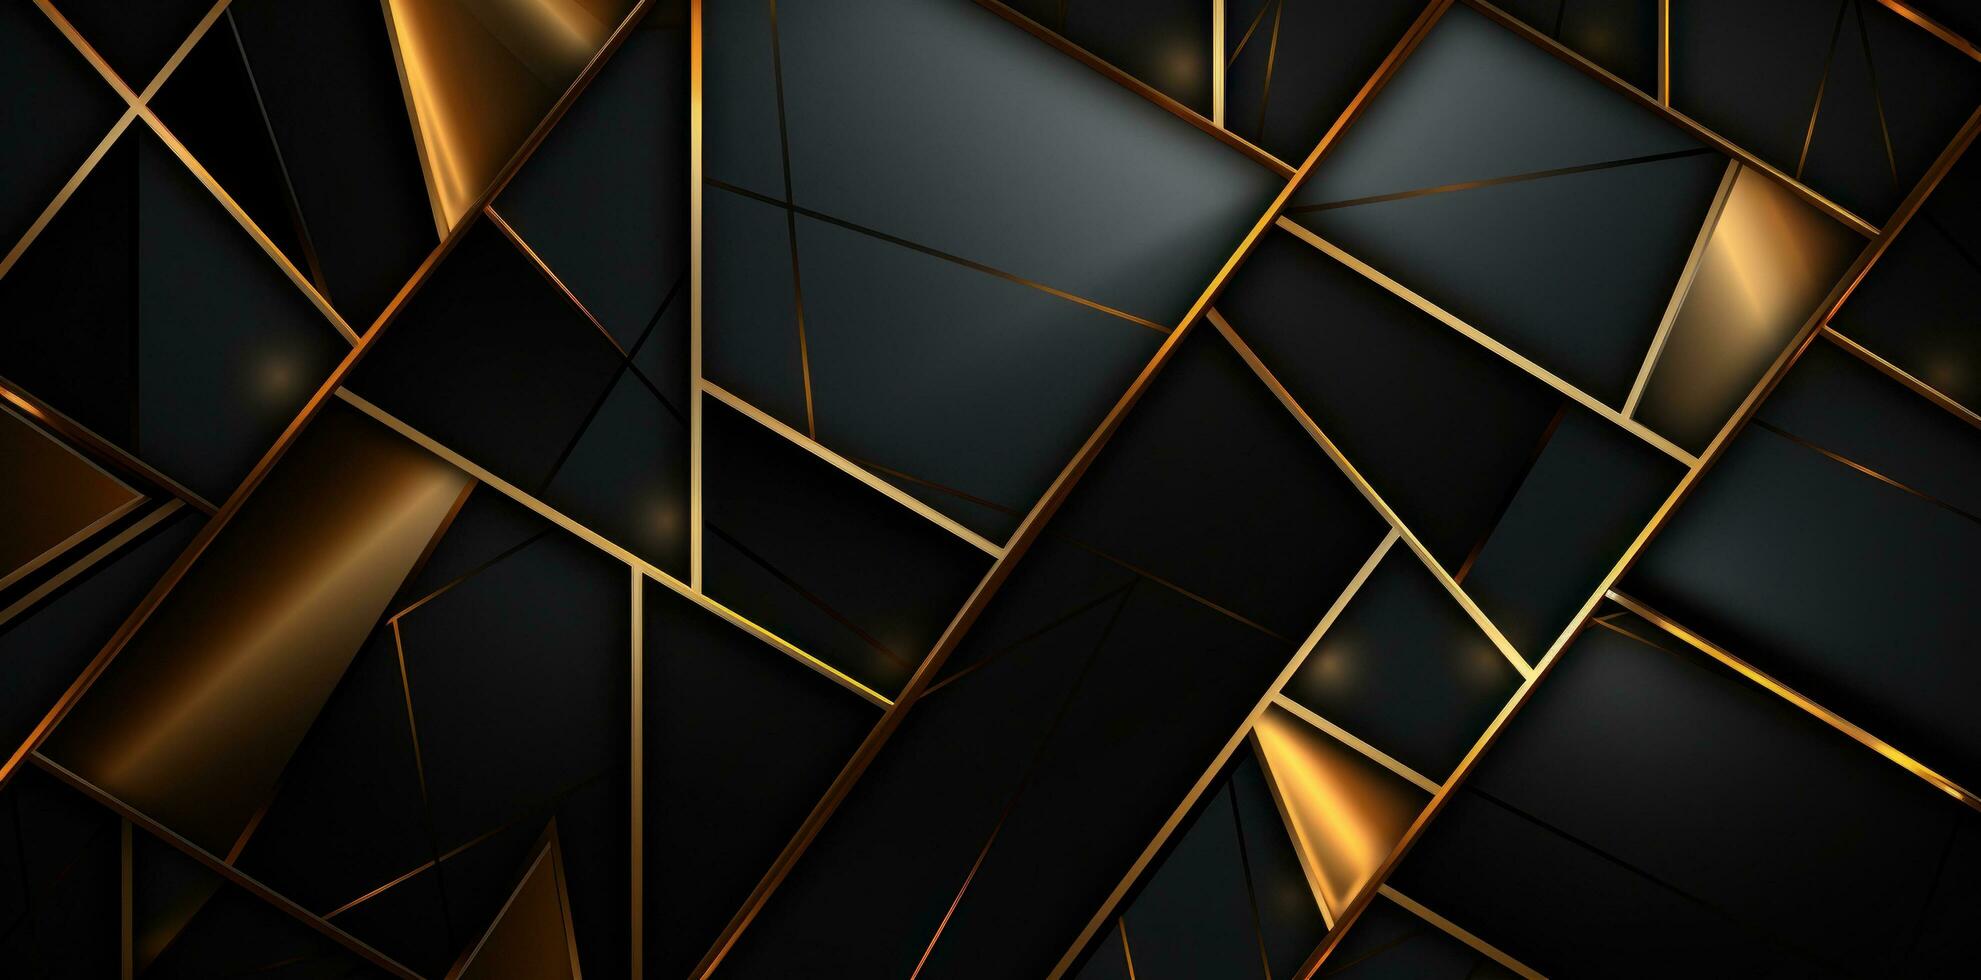 Black And Gold Wallpaper Stock Photos, Images and Backgrounds for Free ...